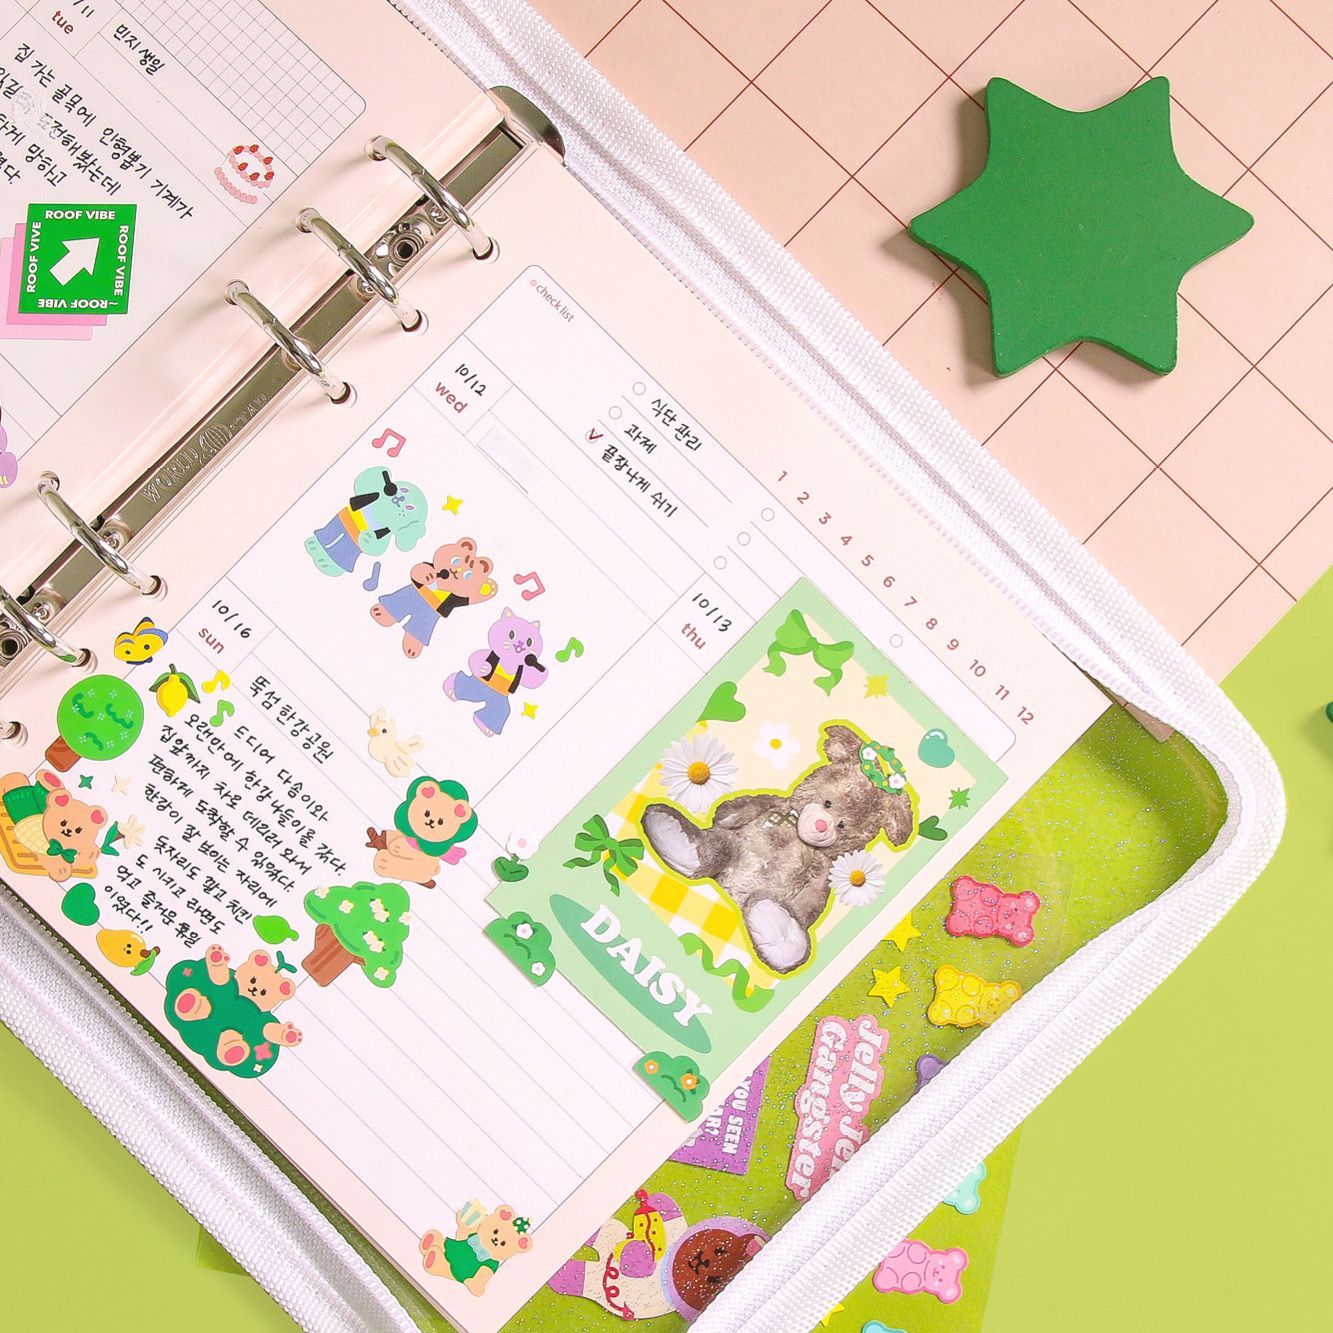 [A6] Second Mansion 6-Ring Square Diary Refill Paper 